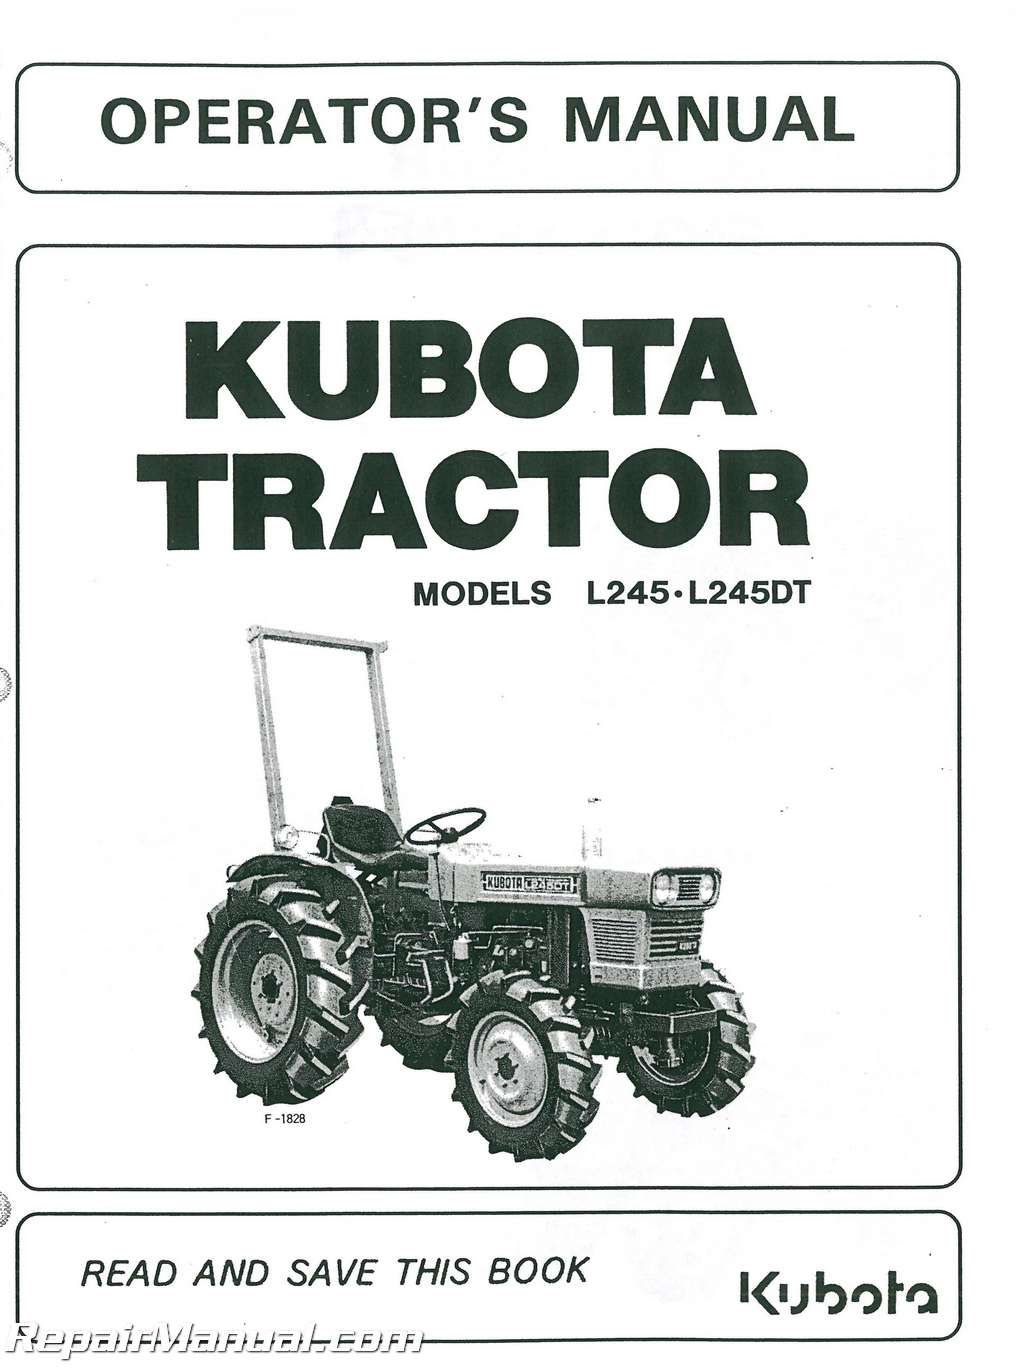 Where can you find a free owners manual for a Kubota?